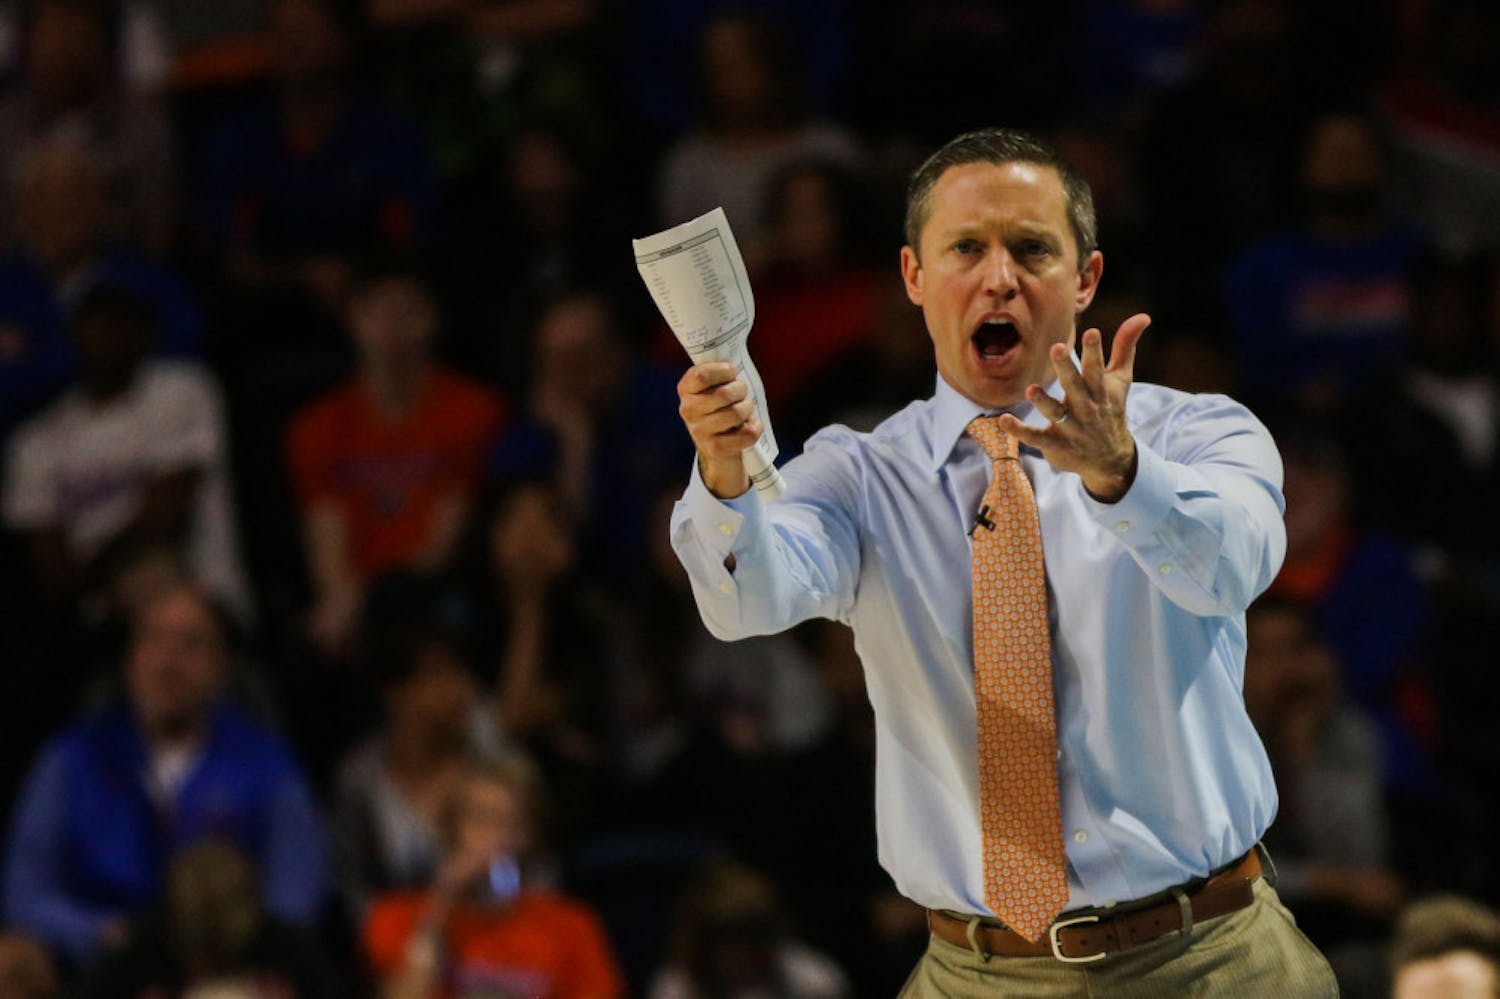 UF coach Mike White (pictured) and the Gators men's basketball team fell to Kentucky 65-54 on Saturday.
&nbsp;